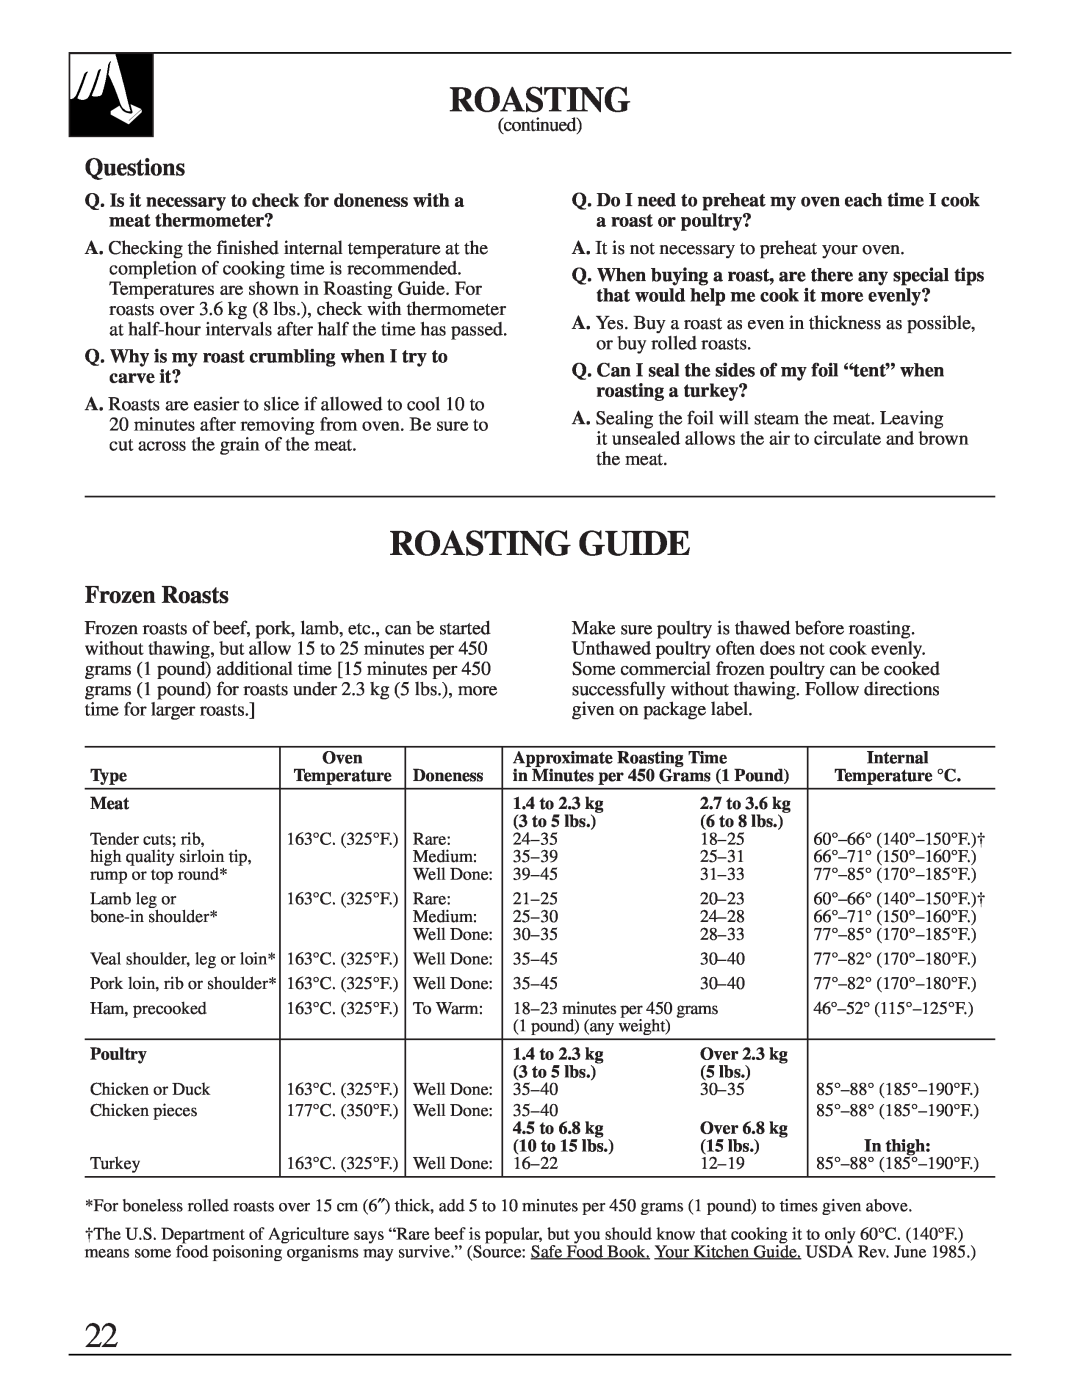 GE JGBP35GZX Roasting Guide, Questions, Frozen Roasts, Q. Is it necessary to check for doneness with a meat thermometer? 